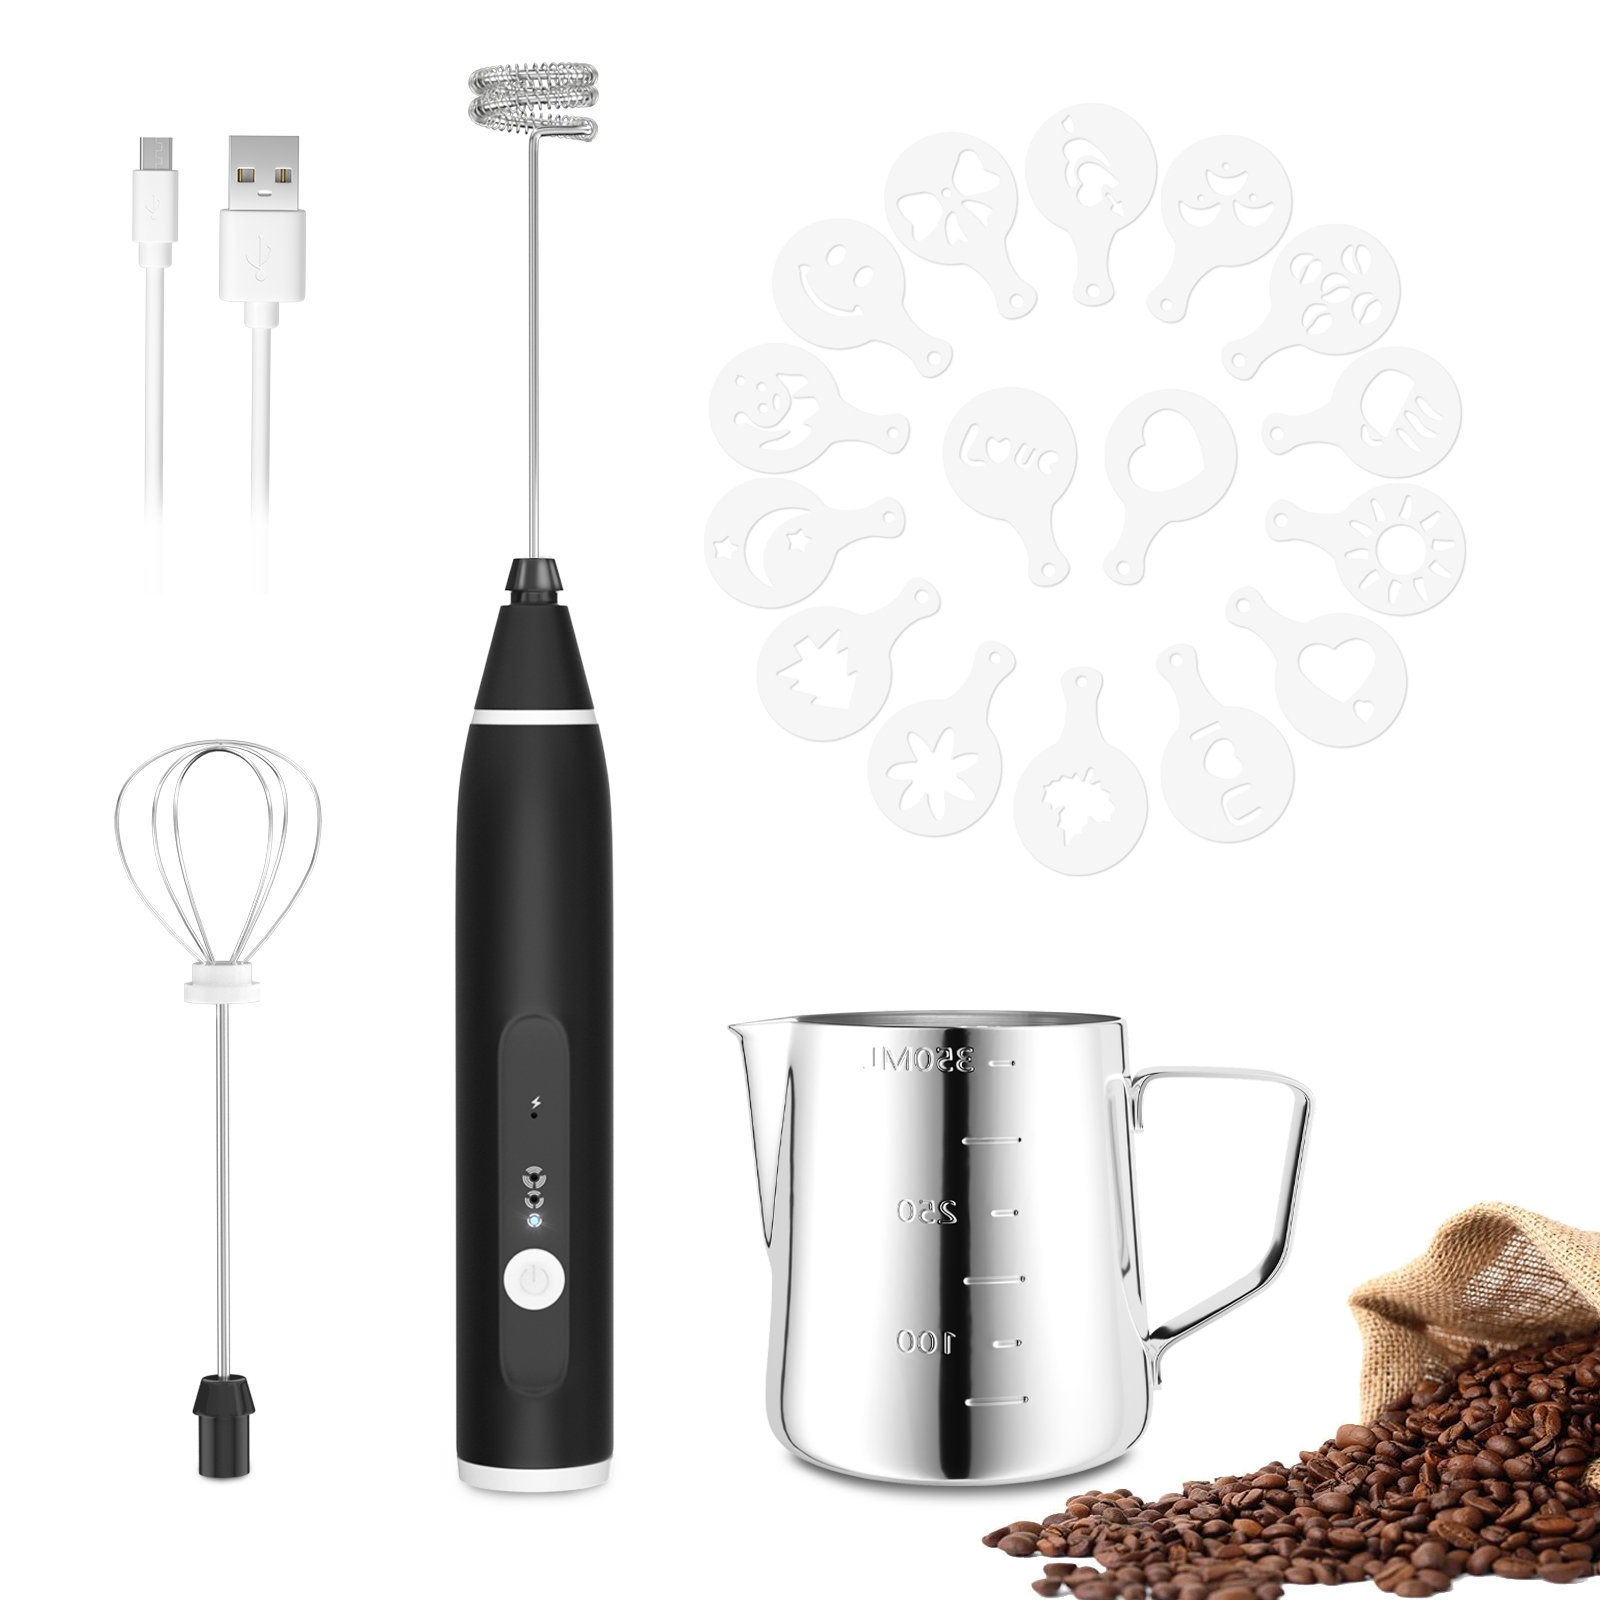 Powerful Milk Frother Handheld Foam Maker for Lattes - Whisk Drink Mixer  for Coffee, Mini Foamer for Cappuccino, Frappe, Matcha, Hot Chocolate, With  Stand, Father's Day, Mother's Day, Christmas, Thanksgiving, Halloween,  Valentine's